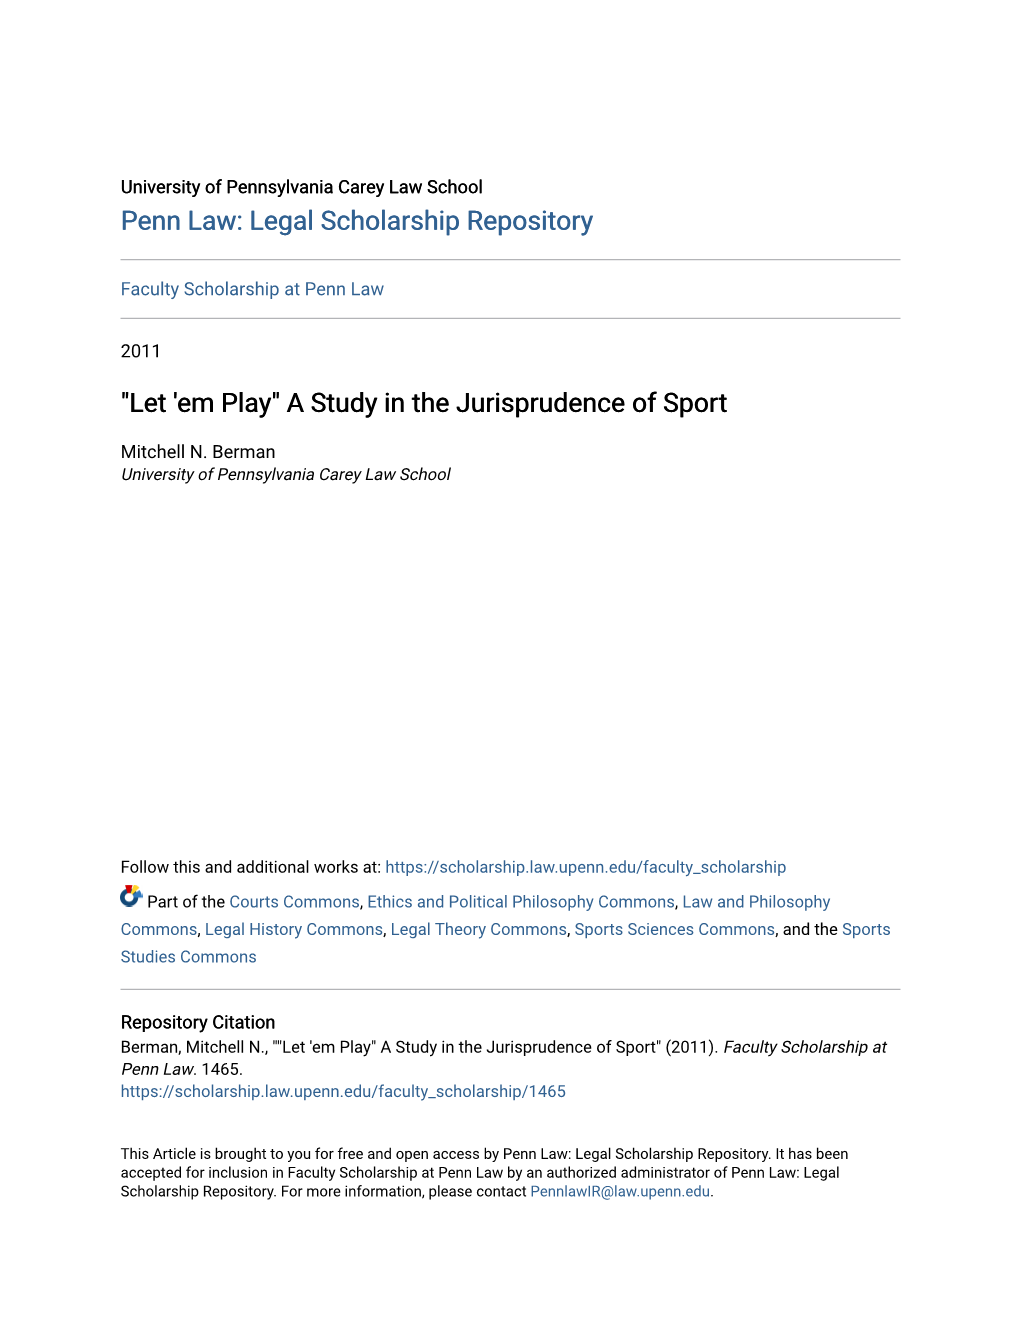 "Let 'Em Play" a Study in the Jurisprudence of Sport